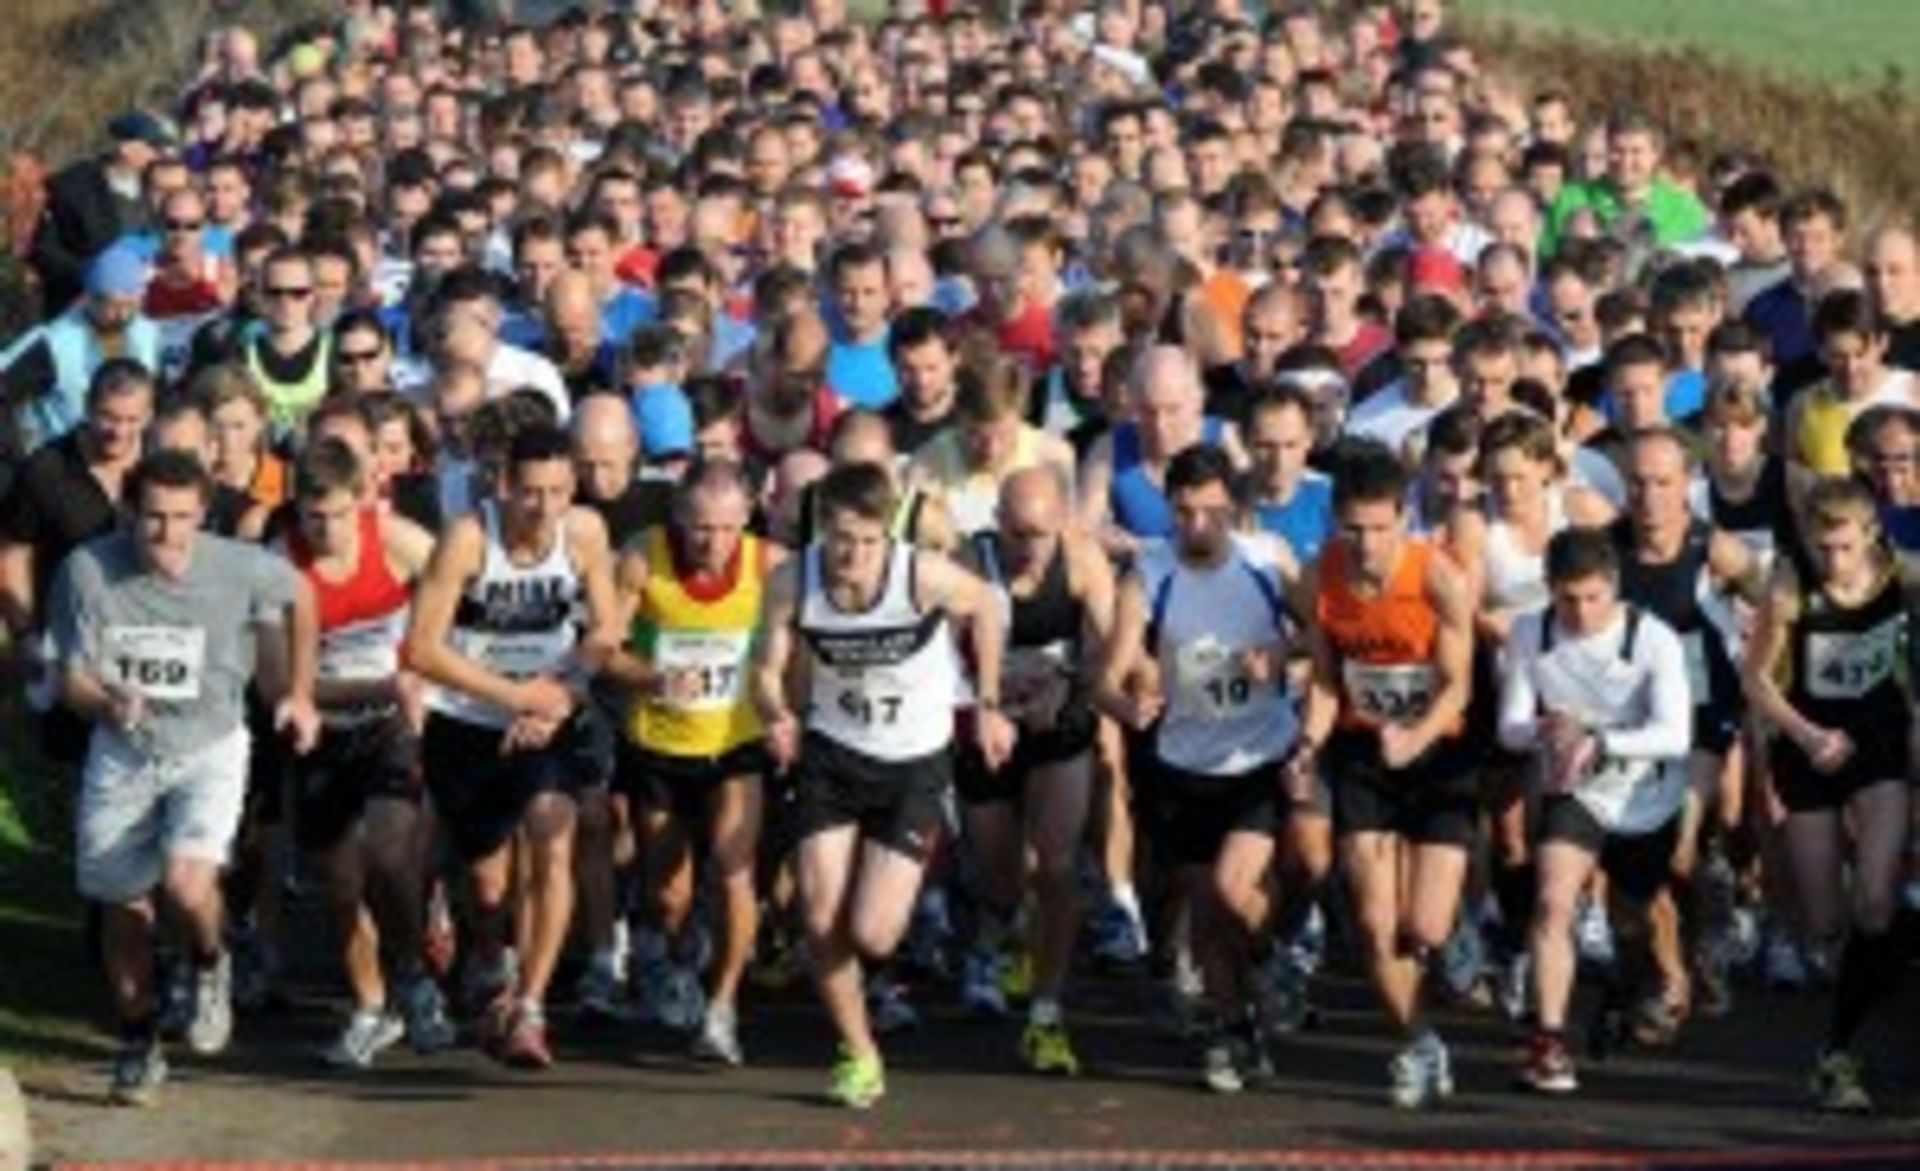 2 guaranteed entries to the Adnams 10k run for 2015, donated by Adnams